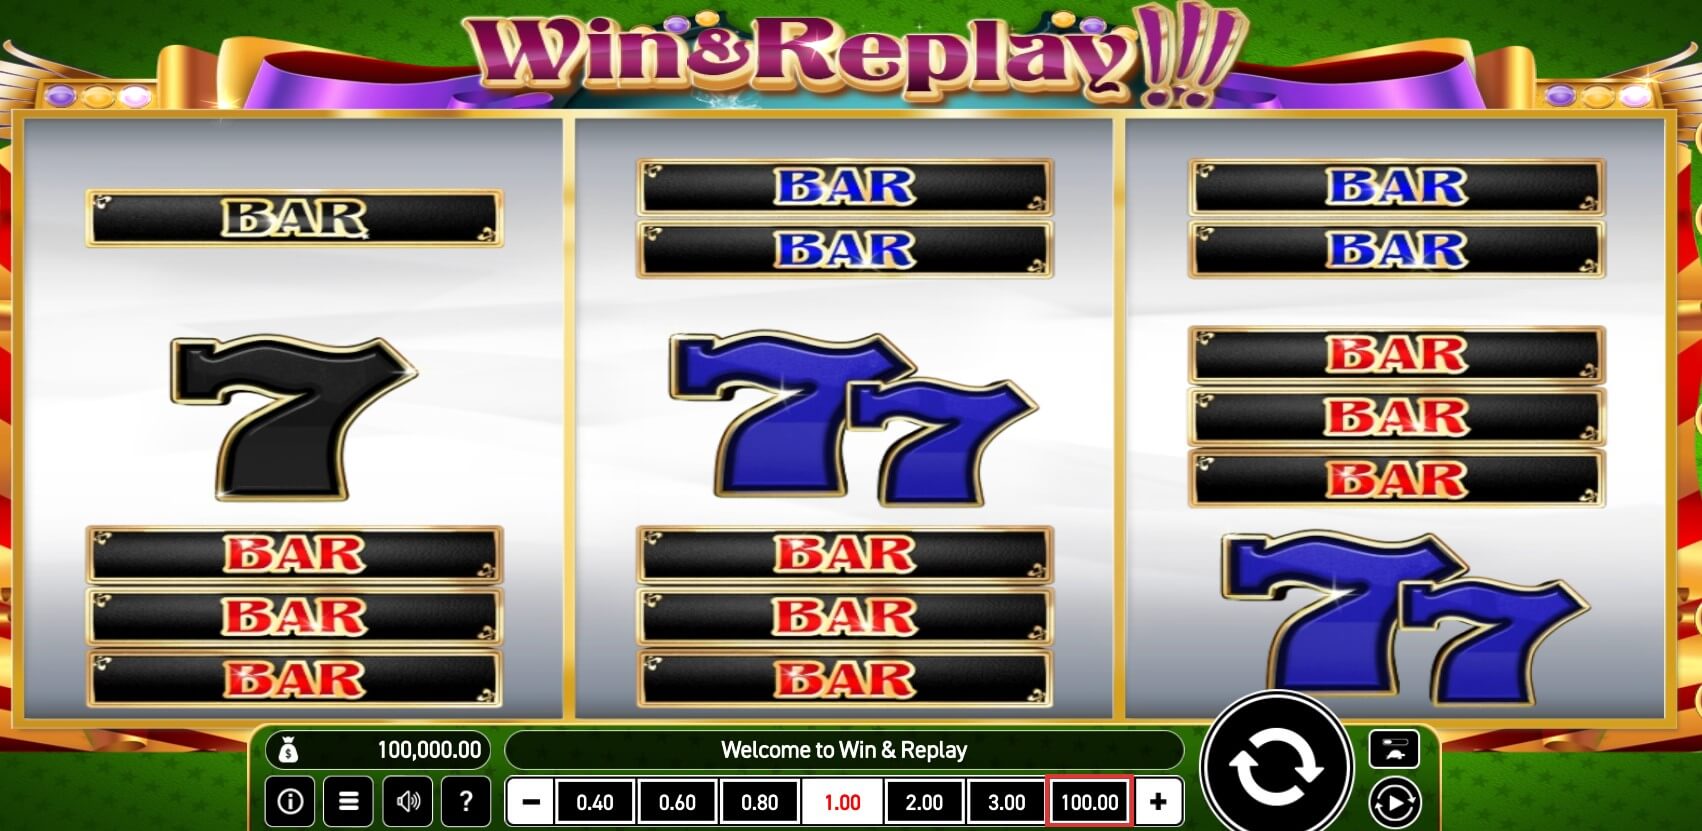 Win & Replay Free Spins